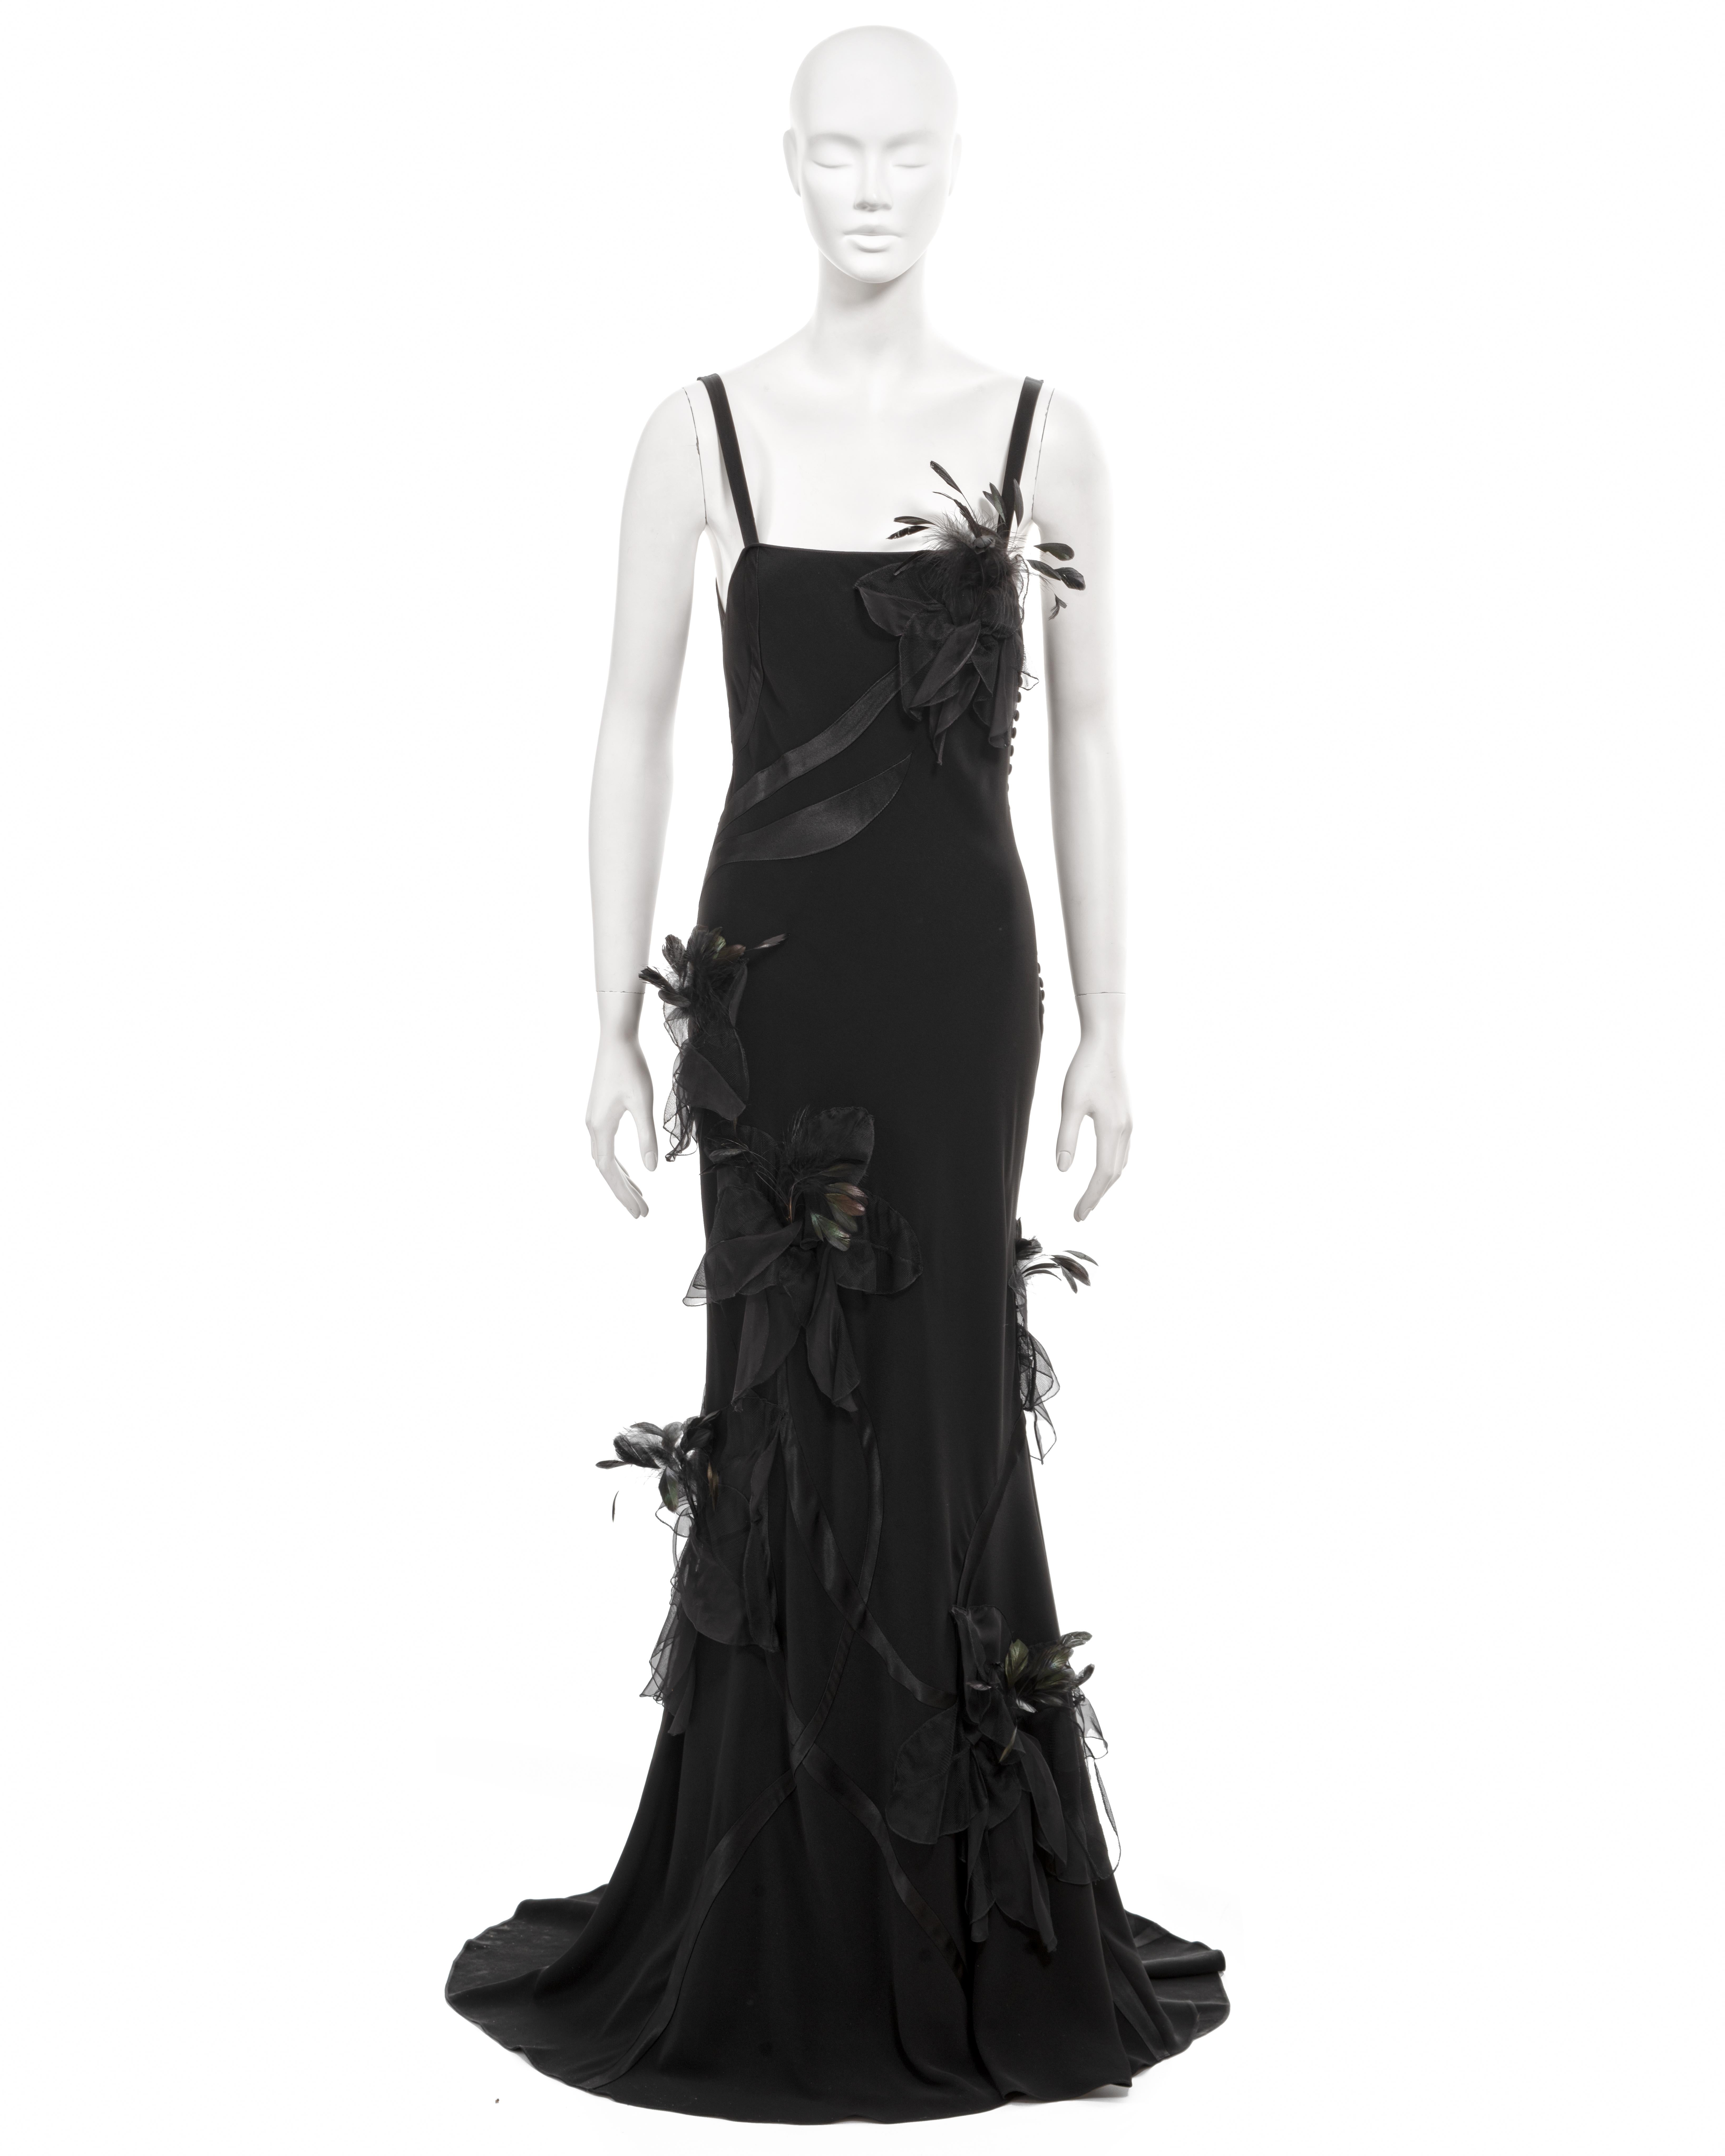 ▪ John Galliano archival evening dress
▪ Sold by One of a Kind Archive
▪ Fall-Winter 2005
▪ Constructed from black acetate-viscose twill
▪ Silk flower stem shaped inserts 
▪ Organza and tulle floral appliqués 
▪ Detachable Rooster and Marabou